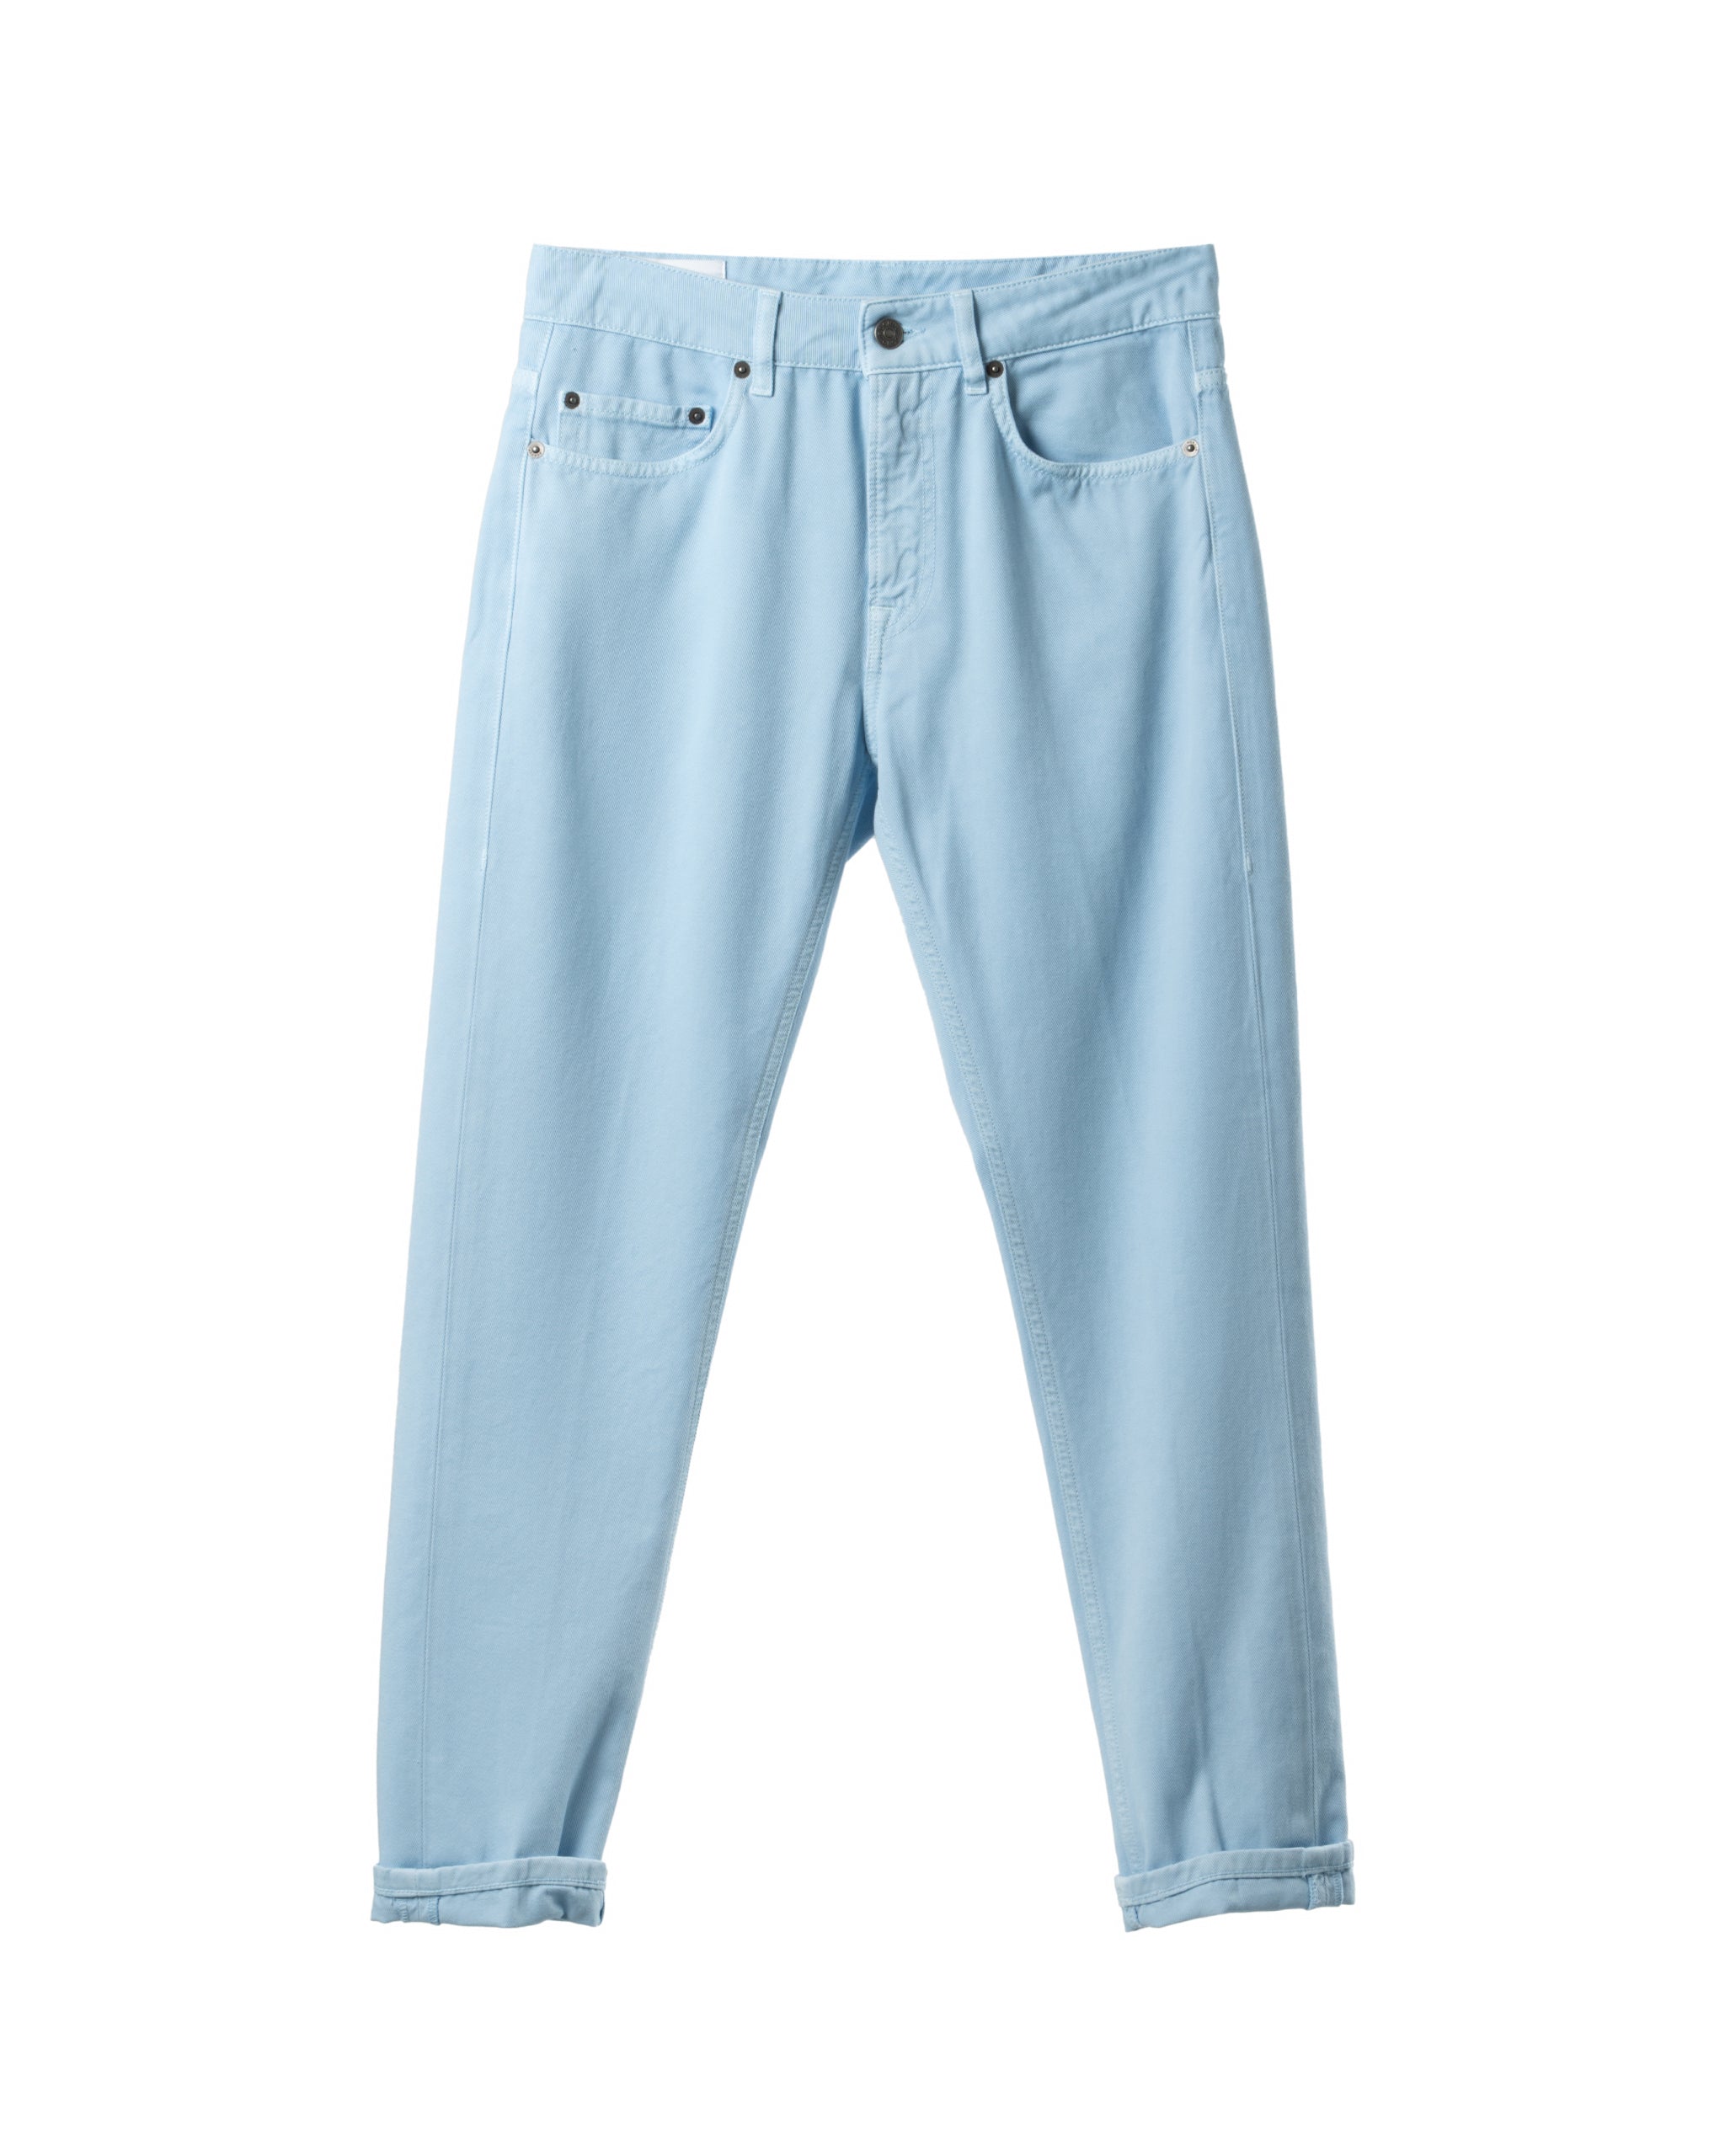 MILA RELAXED FIT DENIM JEANS